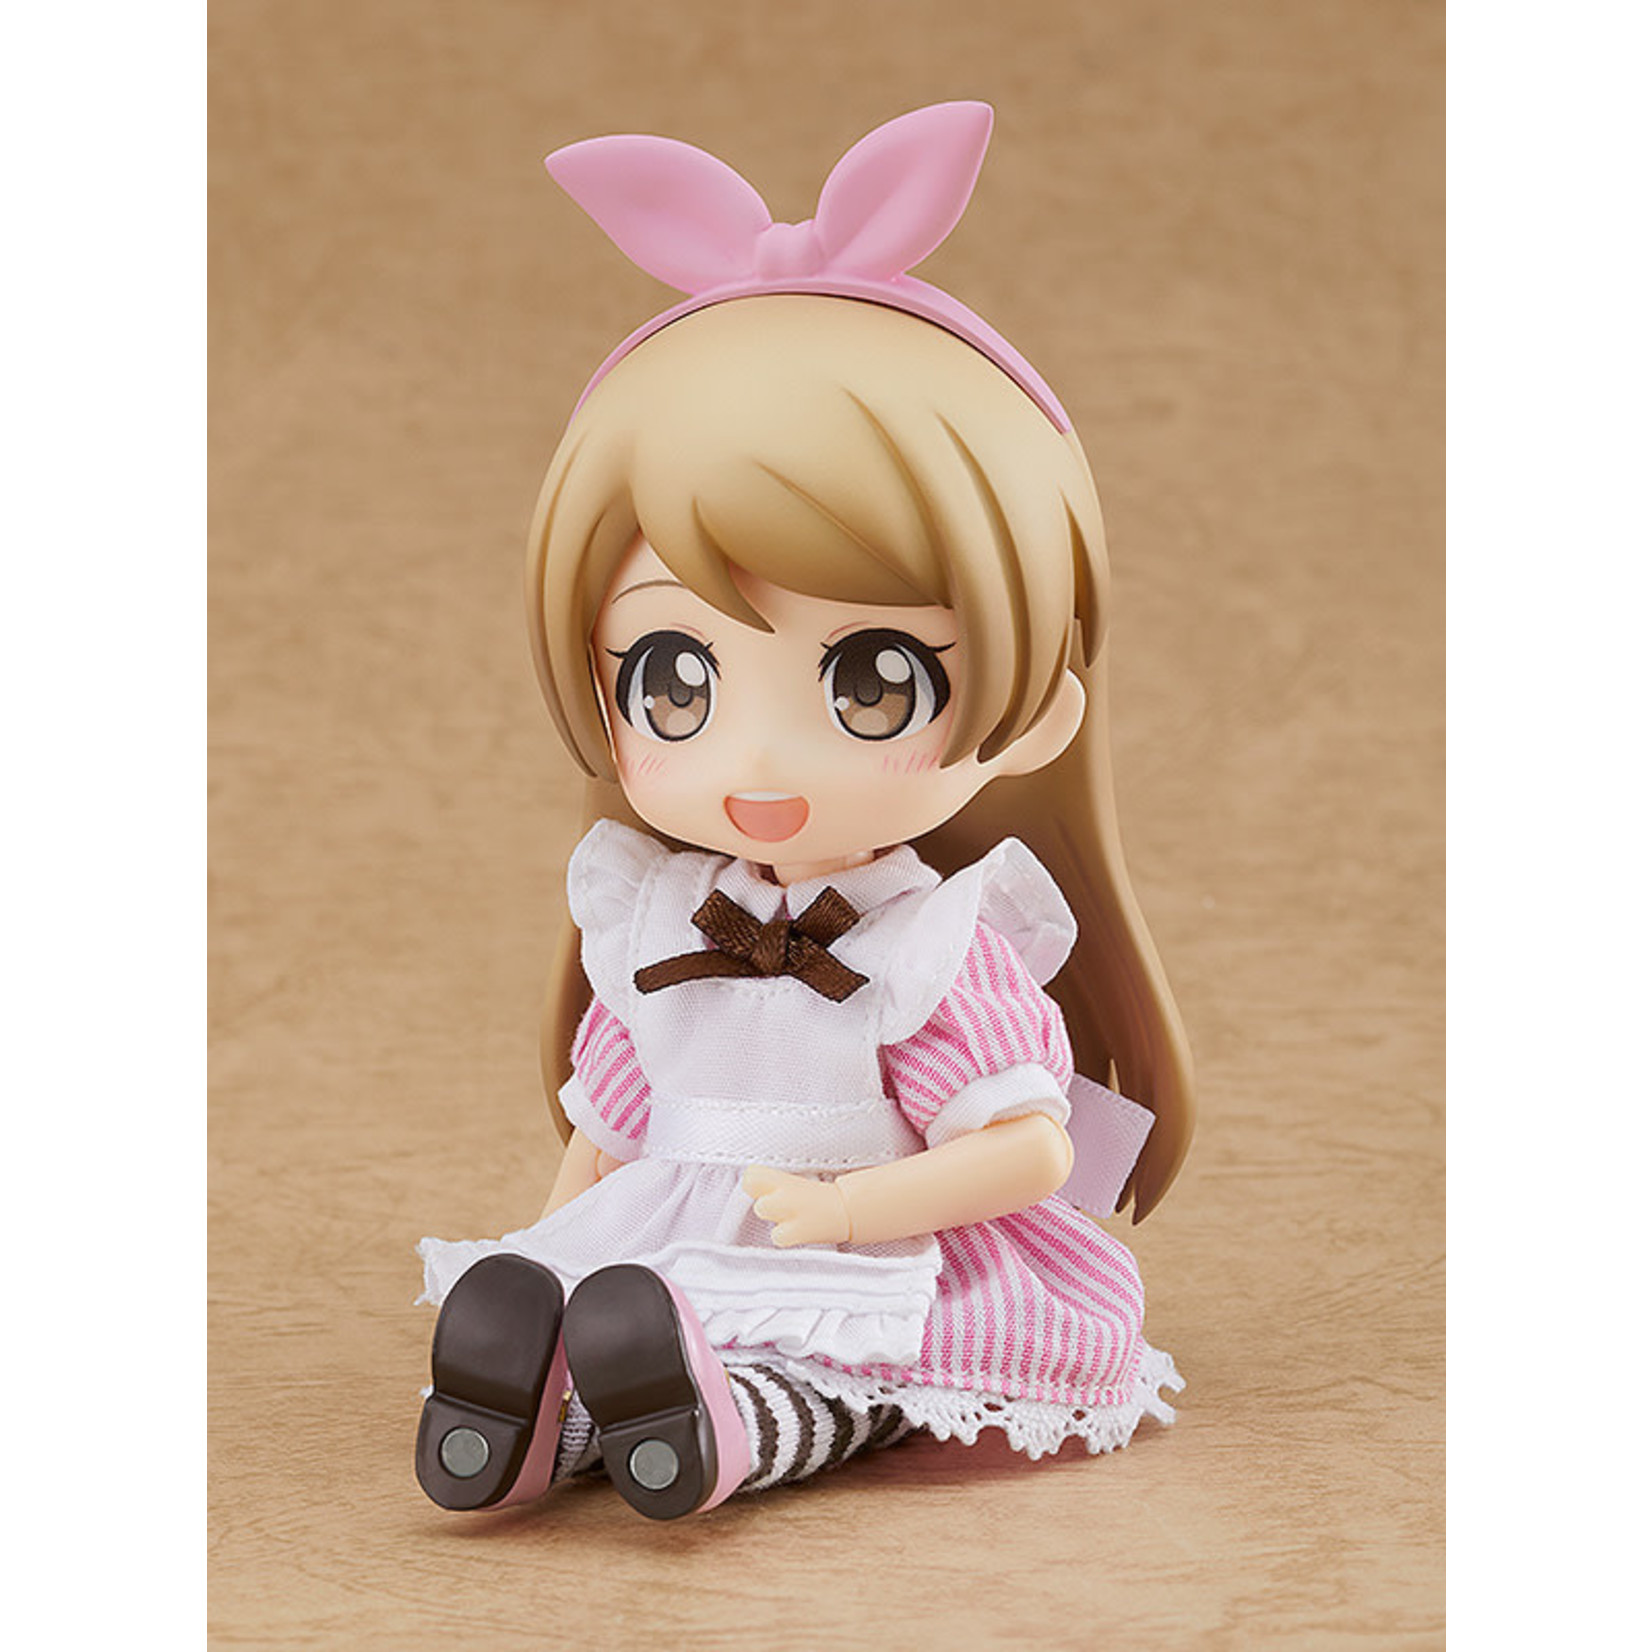 Original Character Alice Nendoroid Doll  Another Color